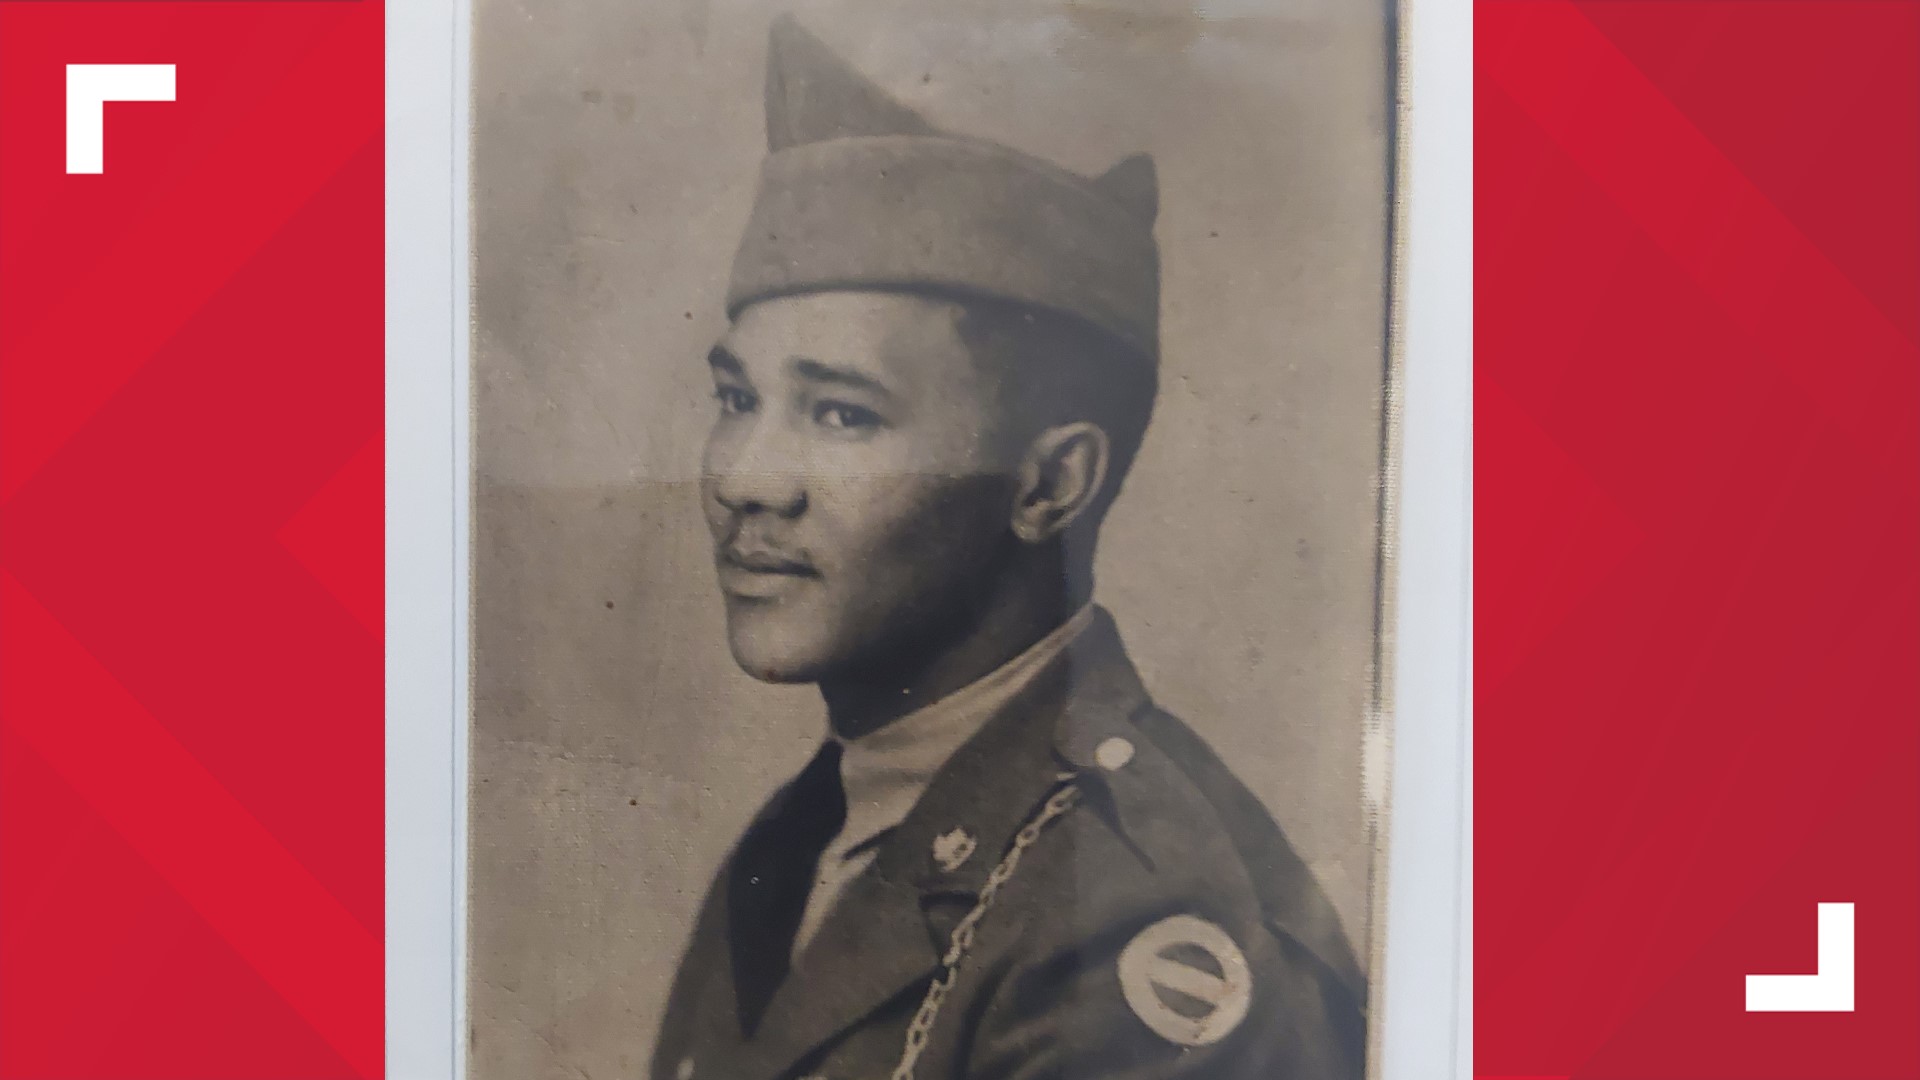 Debra Jones’ uncle was one of only 2,000 Black soldiers among the 160,000 Allied troops to storm the beaches of Normandy 79 years ago.